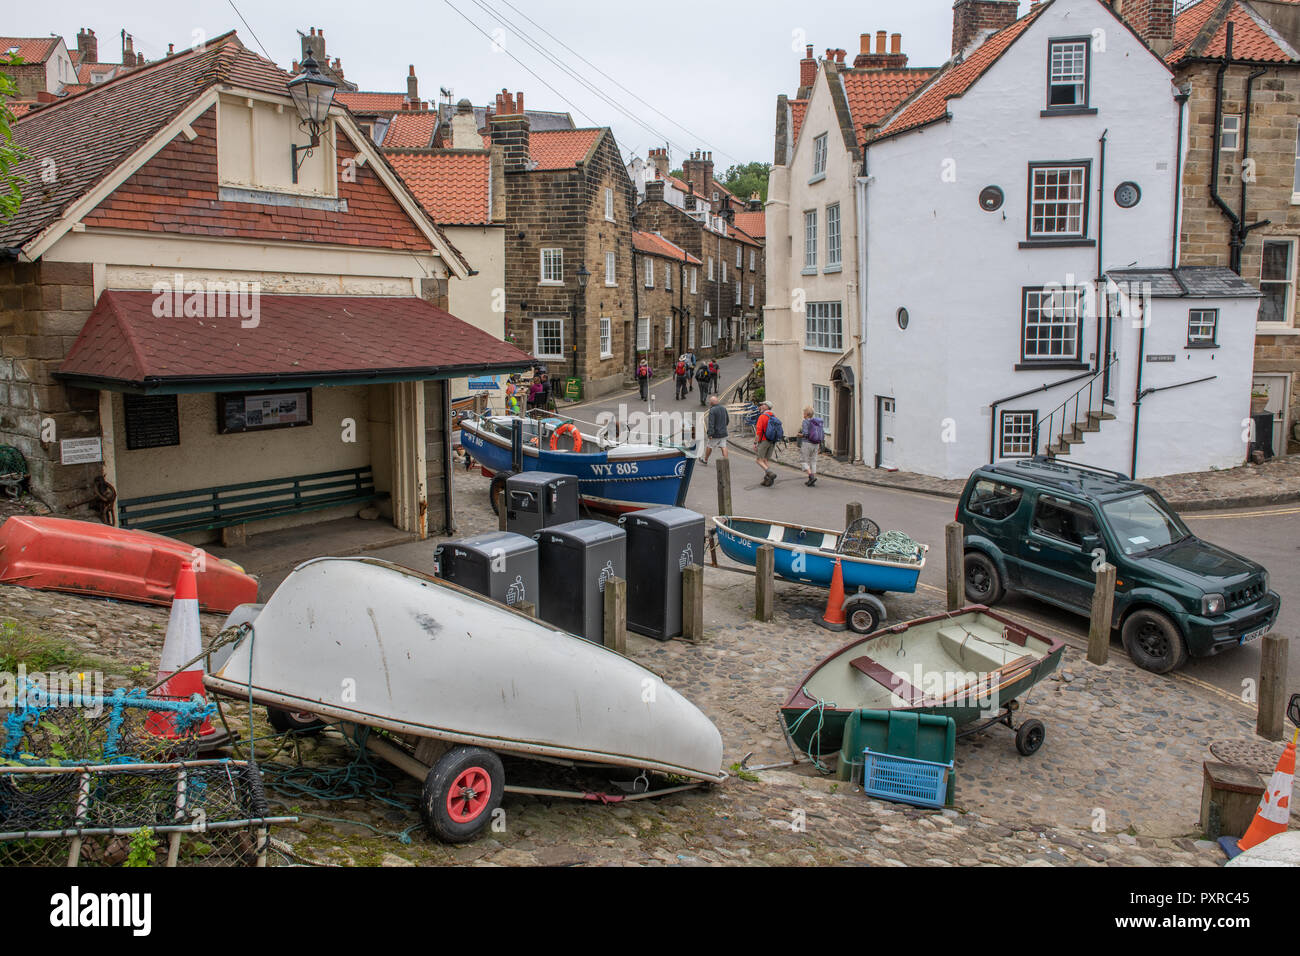 A group of small boats rest on the side of the road, Robin Hood's bay, Yorkshire, UK Stock Photo